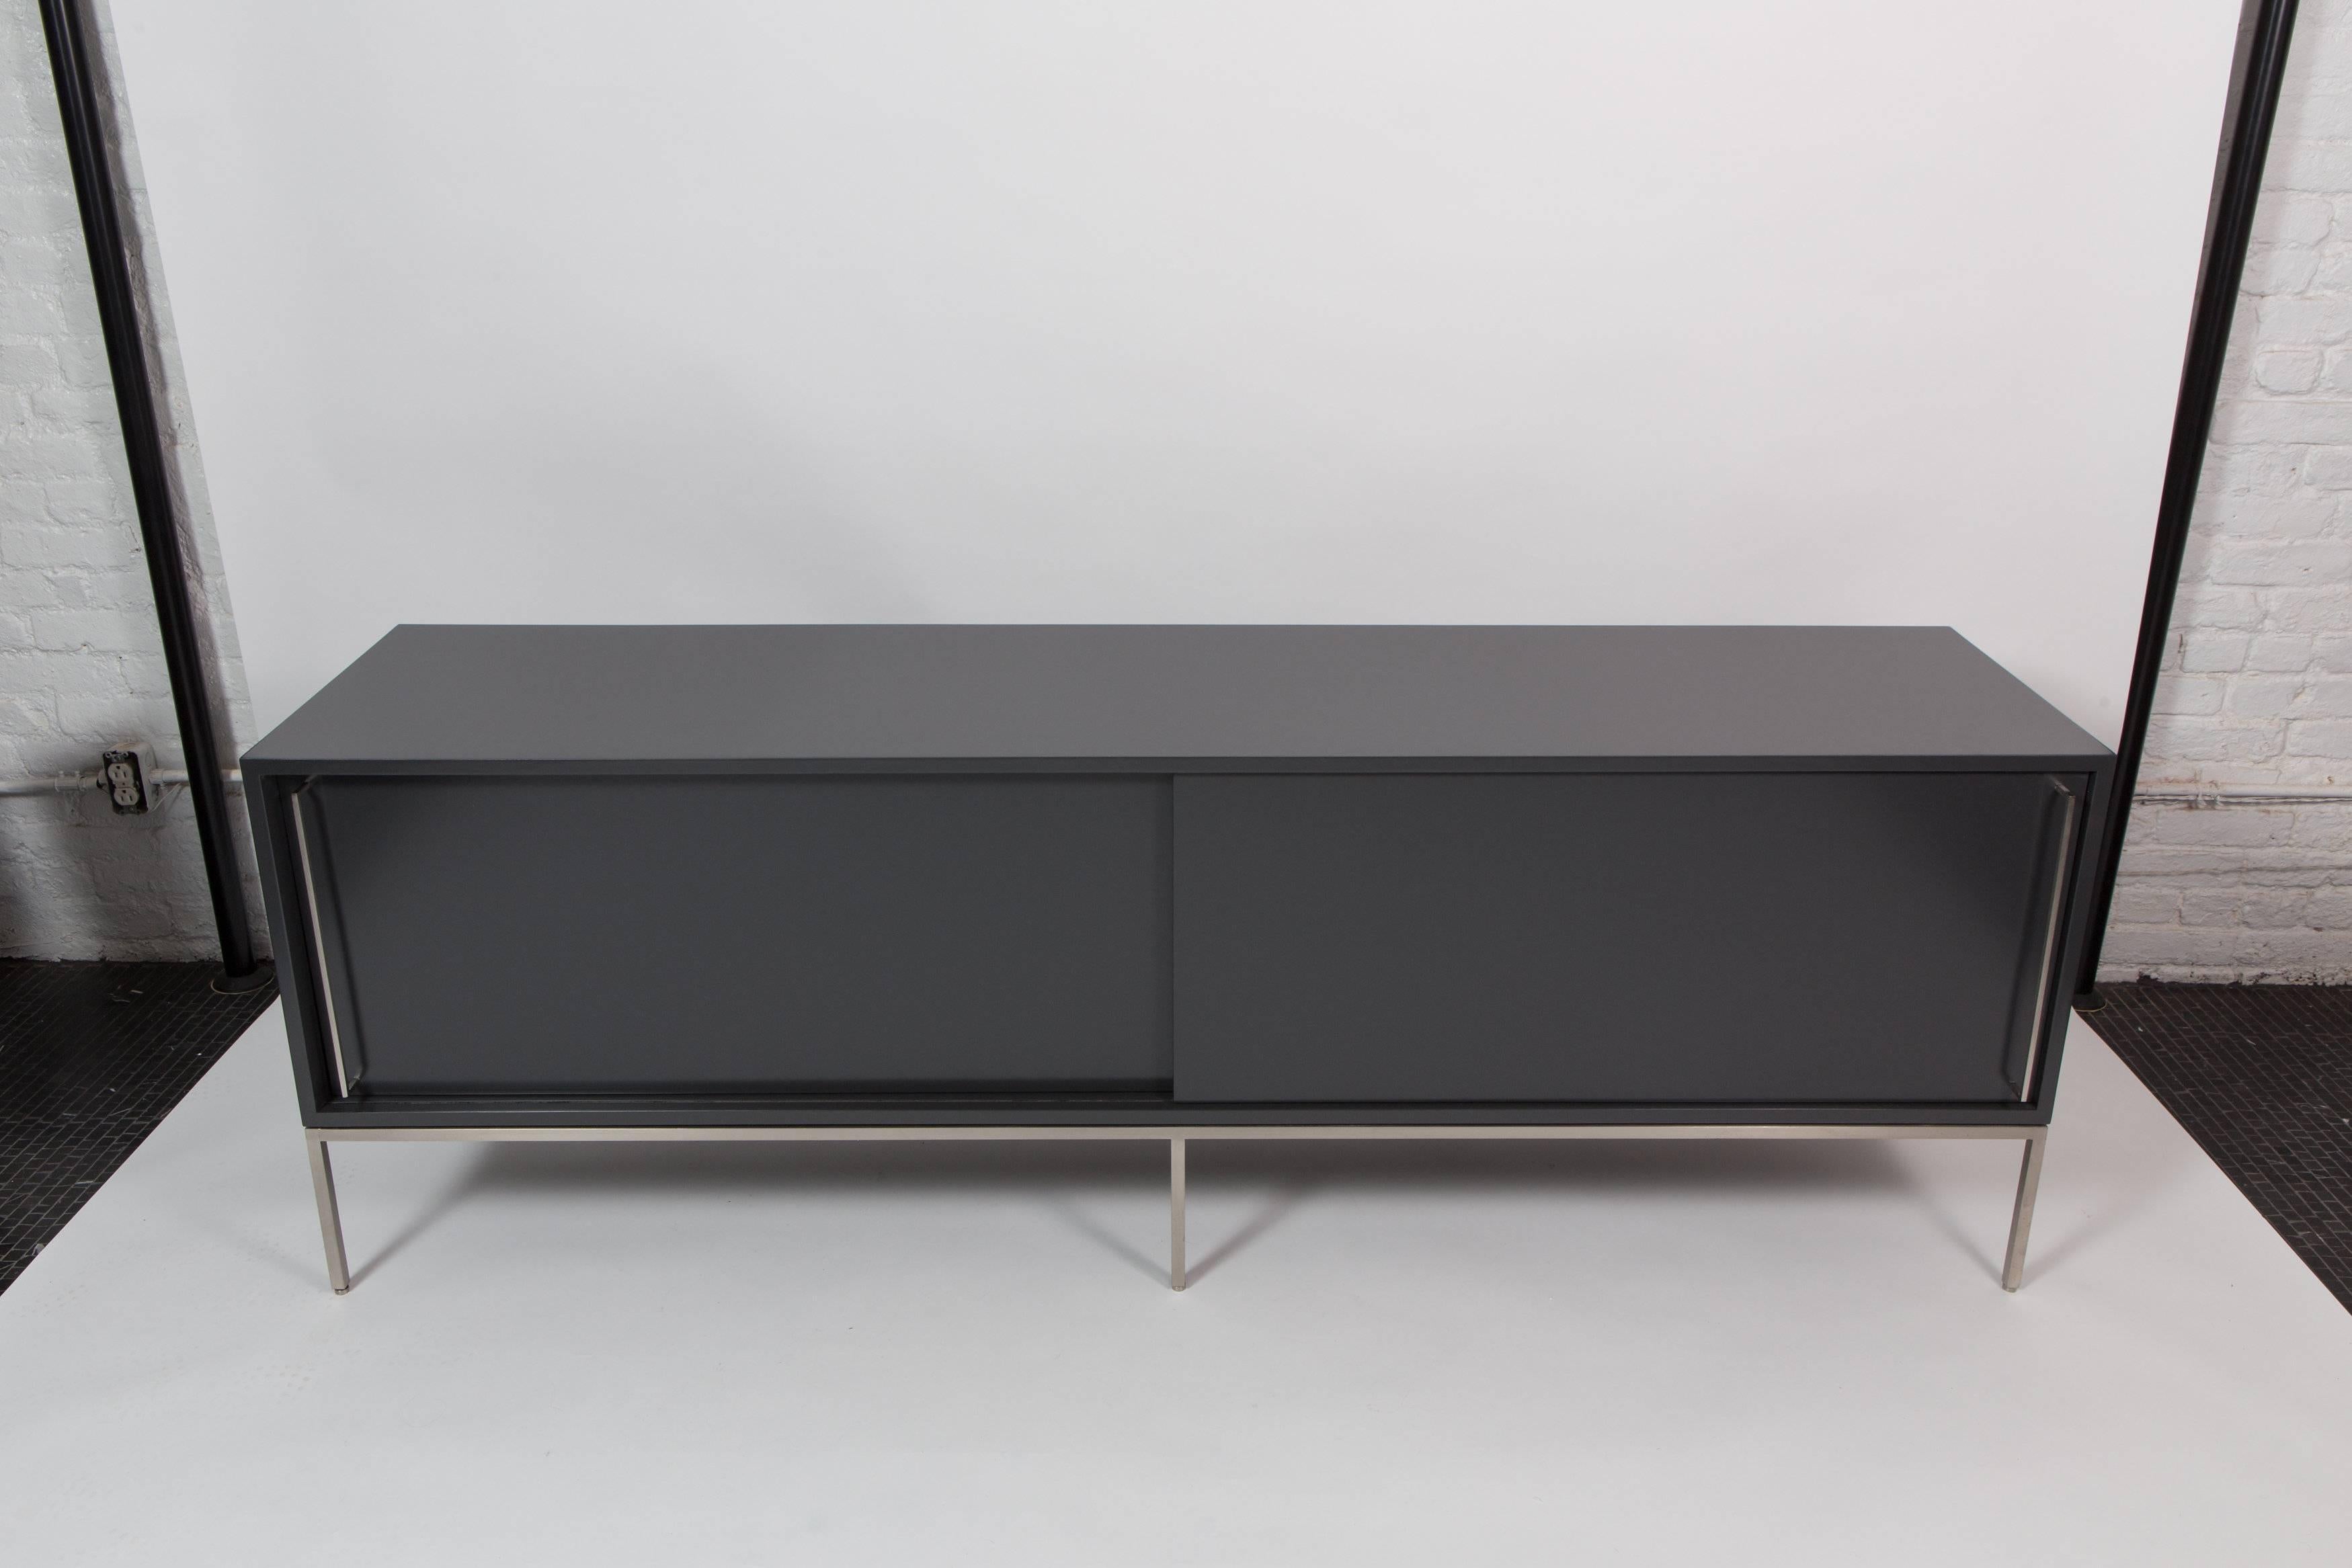 Floor model re: 379 credenza available and in stock in BM wrought iron satin lacquer on stainless steel base.  One adjustable shelf in each compartment.  This credenza has been a staple in our collection since 2011.